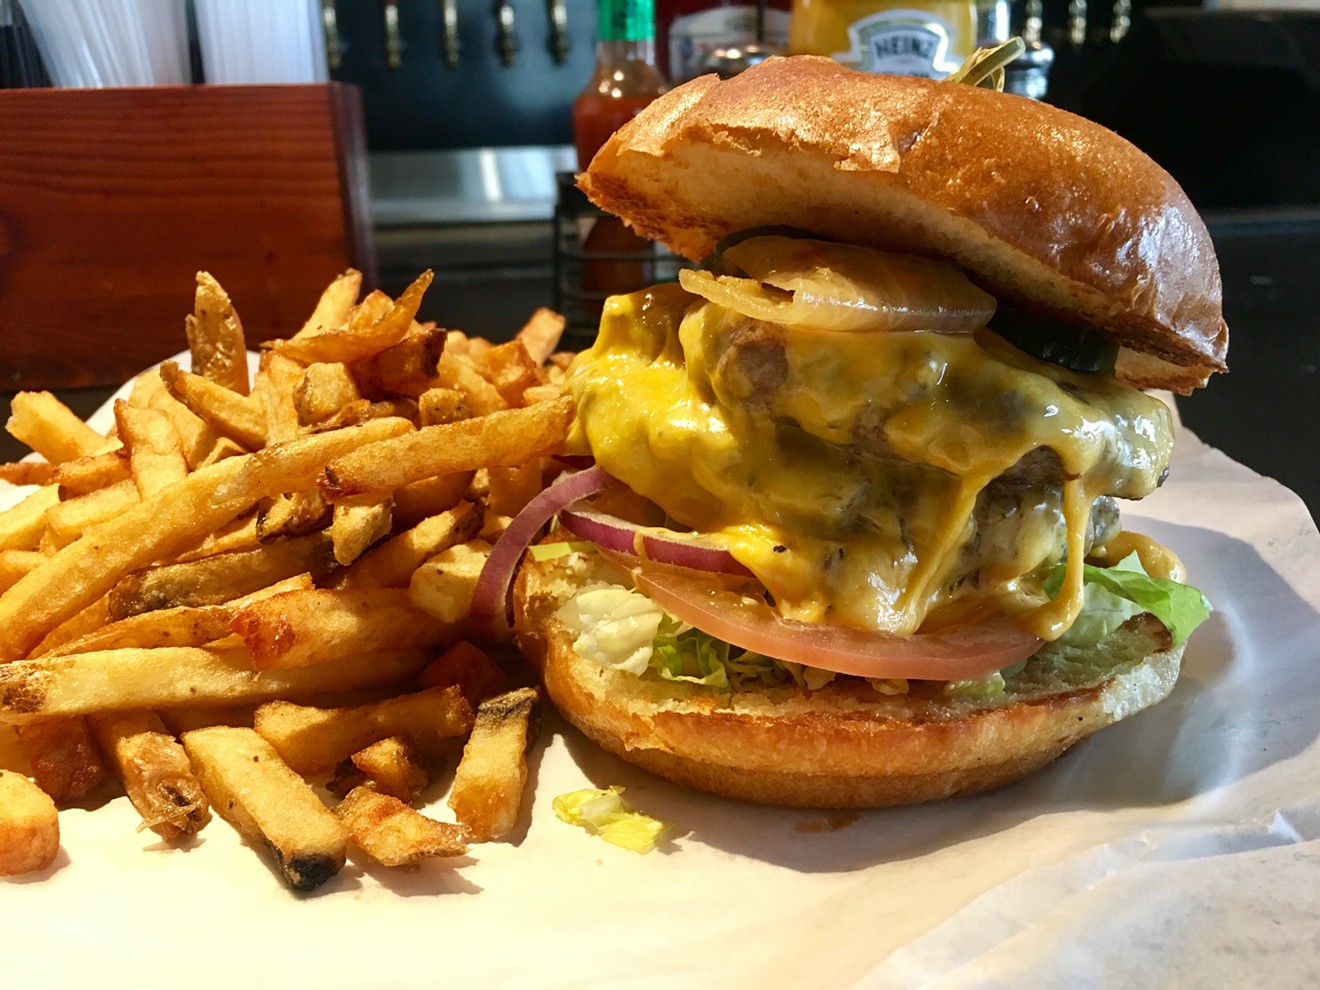 The golden glow of American cheese on the Club Schmitz burger ($10 at lunchtime).